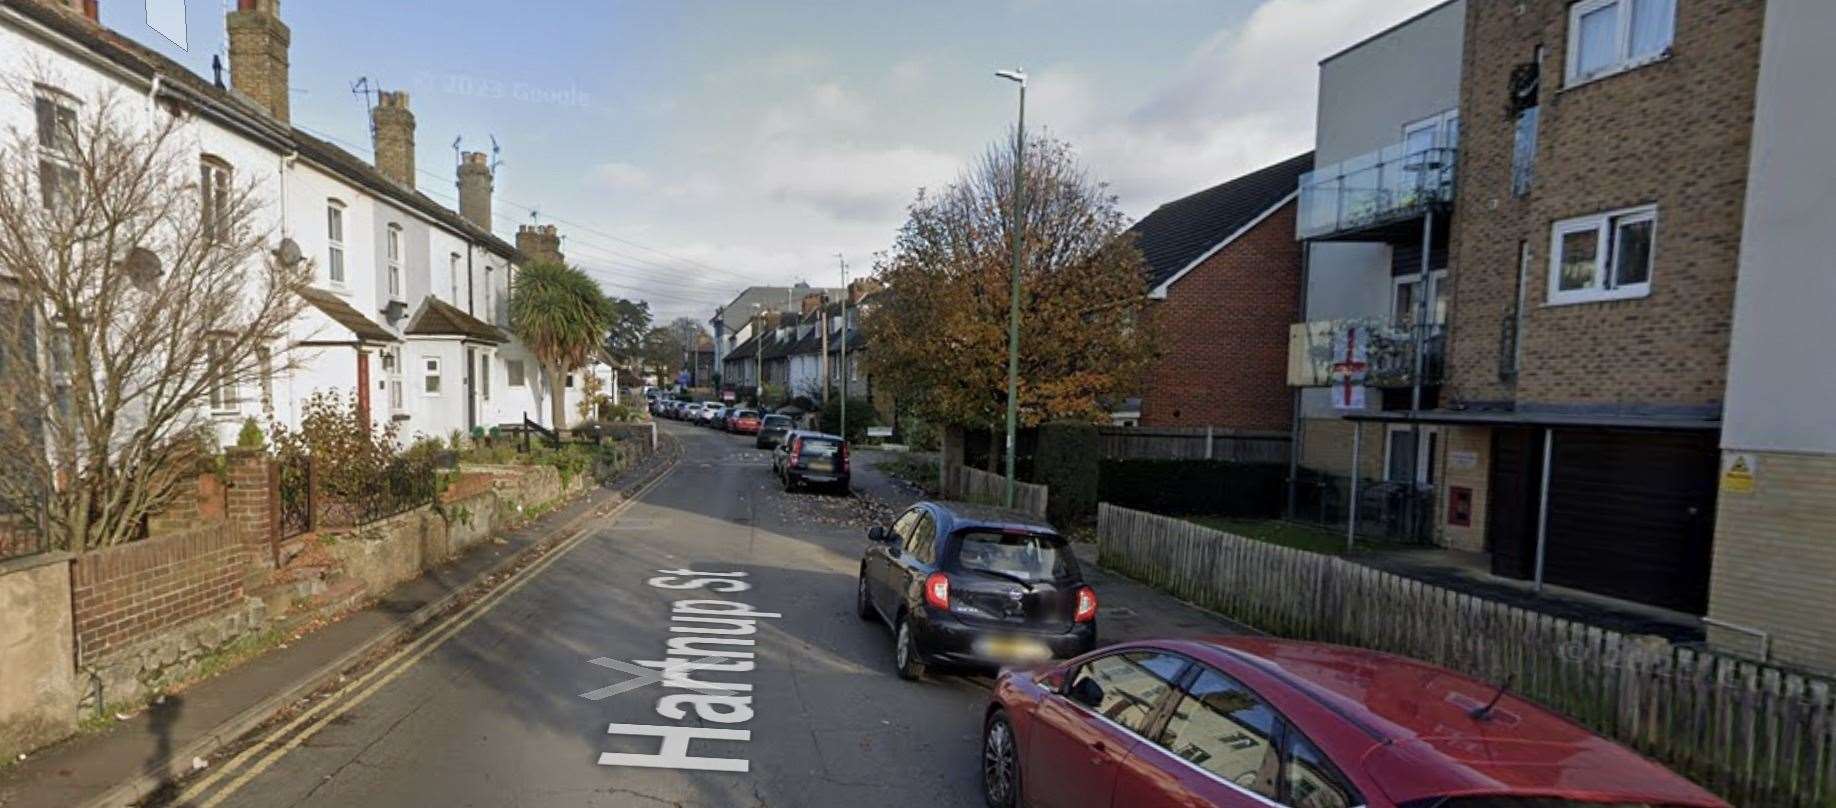 Emergency services and forensic officers have been spotted at an address in Hartnup Street, Maidstone. Picture: Google Maps